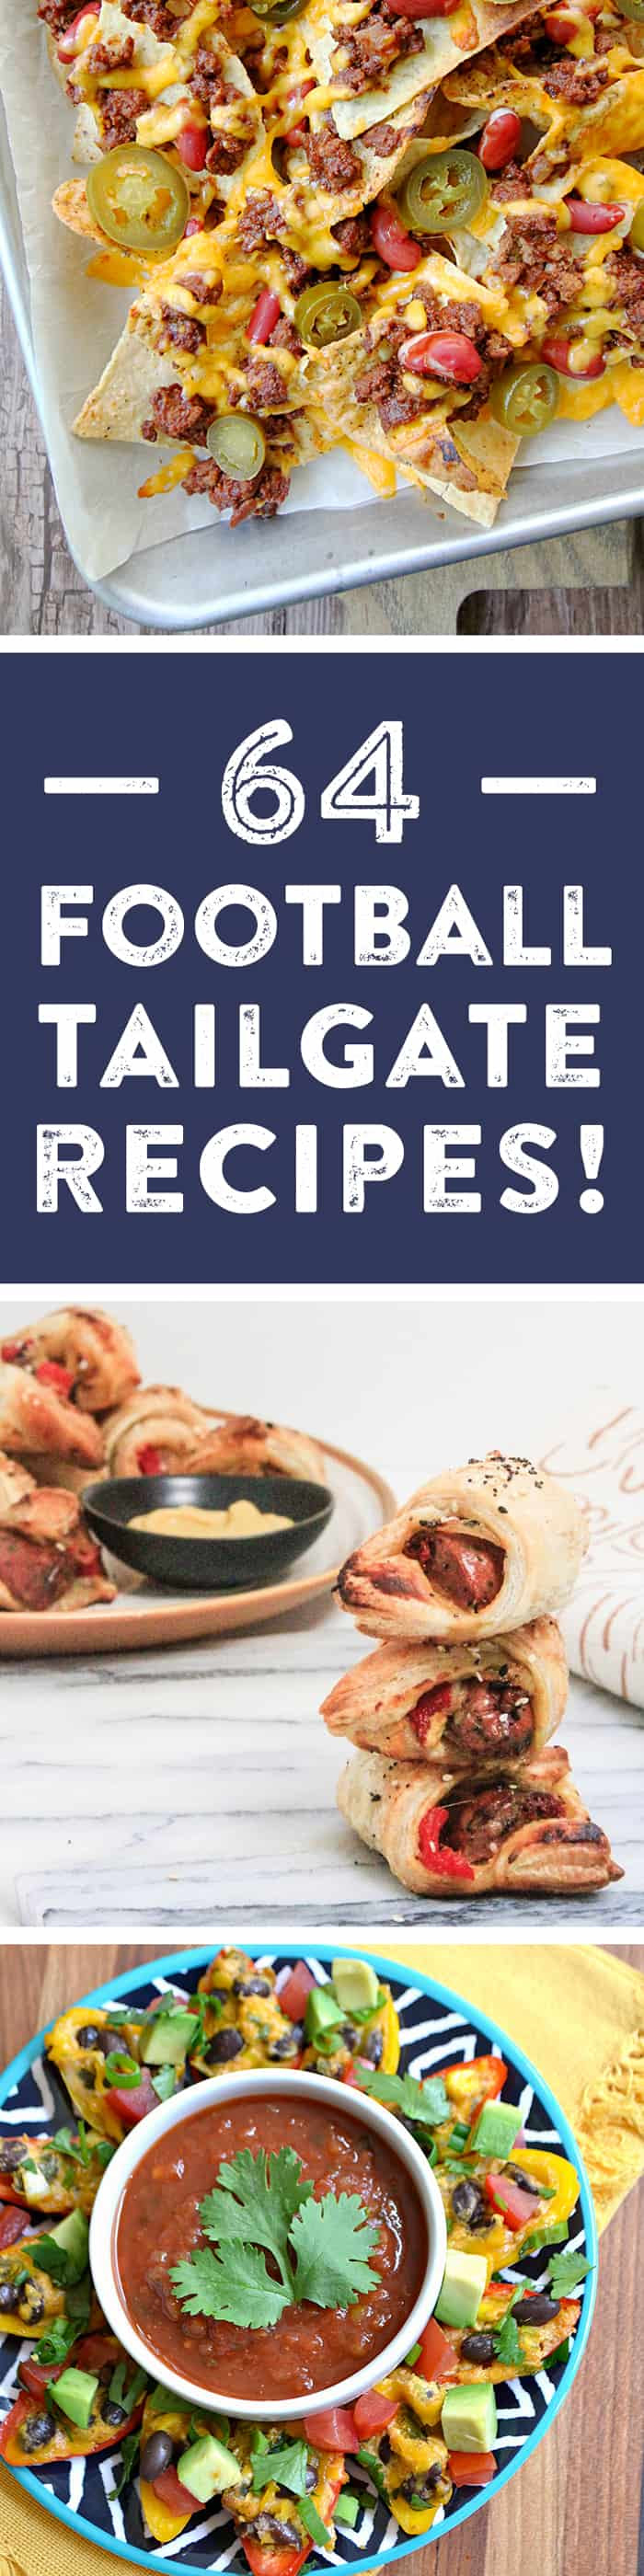 64 recipes for the perfect football tailgate! Check out everything from appetizer recipes, entree recipes, cocktail recipes, dessert recipes, side dish recipes and more to cheer on your team! #foodiefootballfans